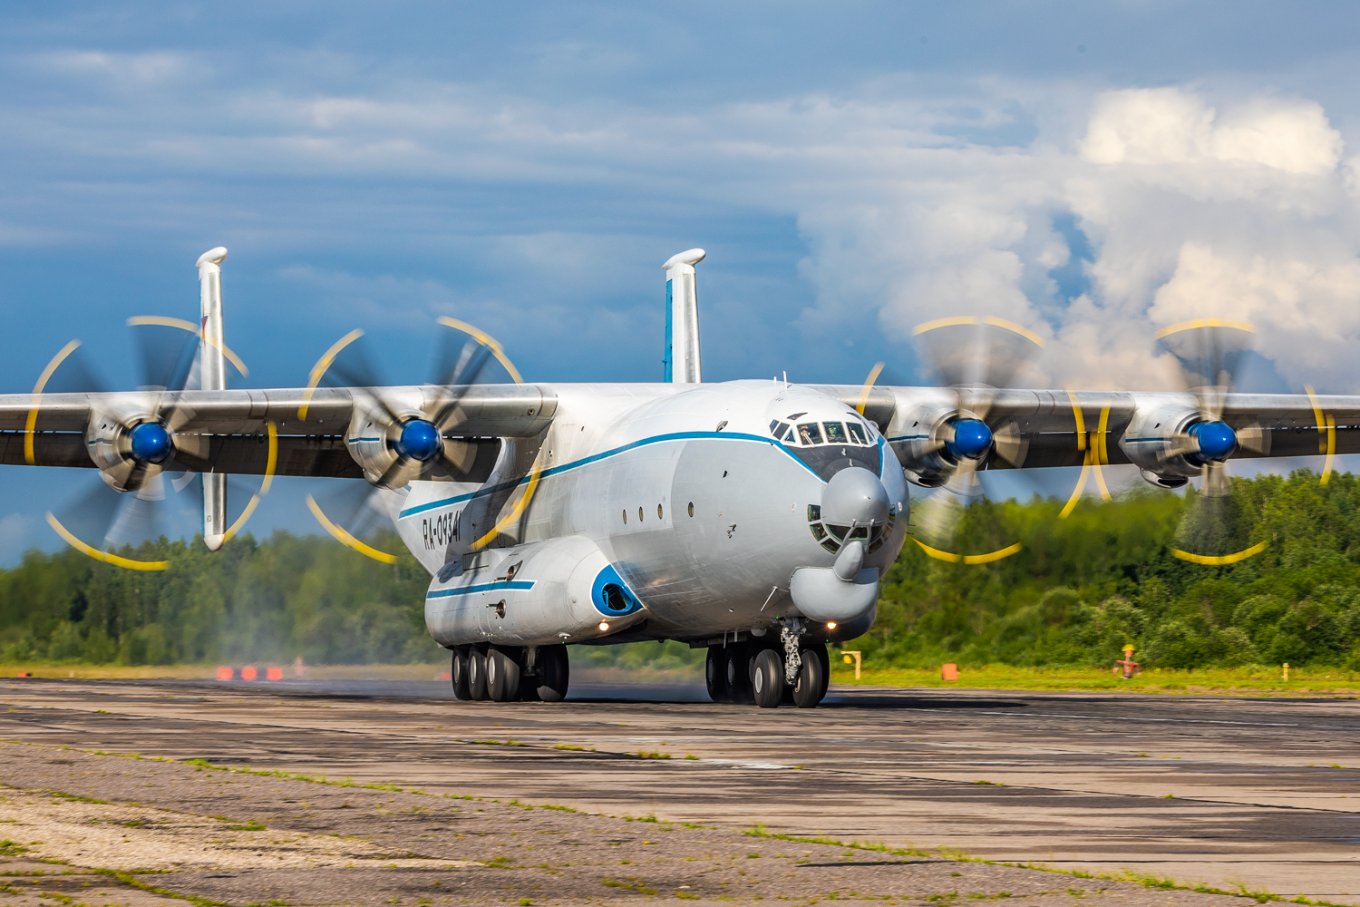 Russians Used Rare An-22 Antey to Deliver Military Cargo to Belarus, Defense Express, war in Ukraine, Russian-Ukrainian war